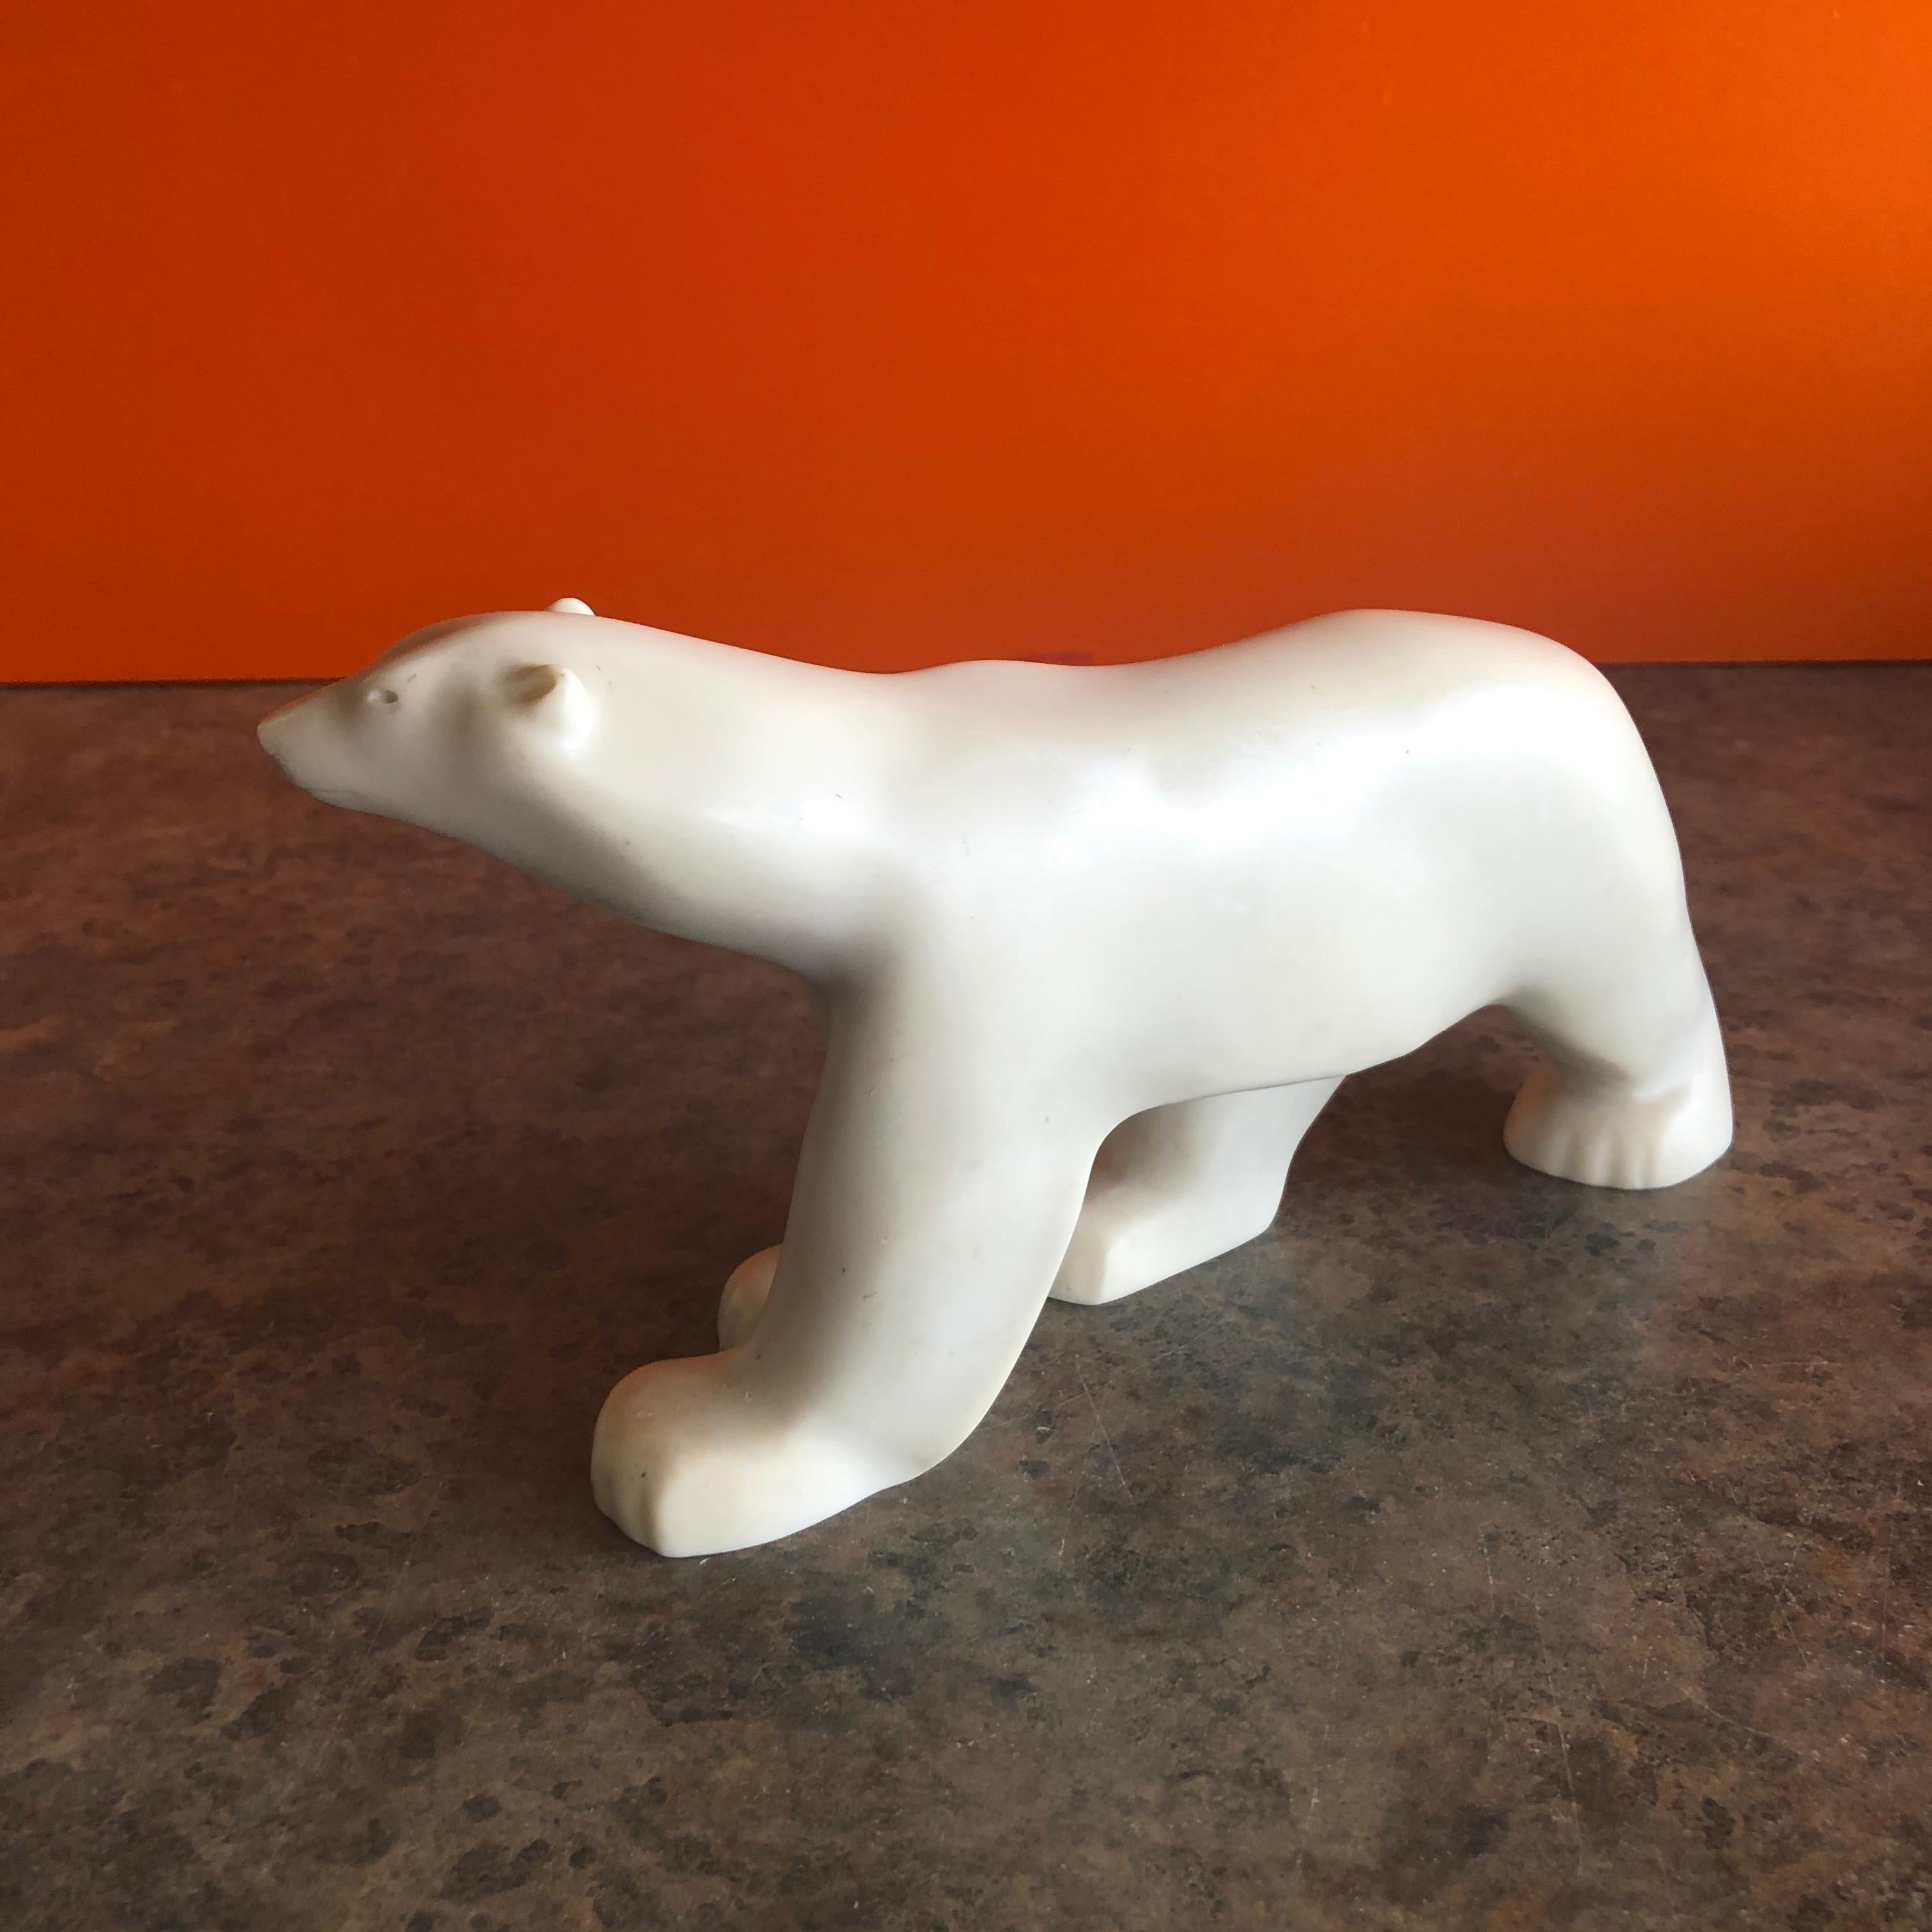 20th Century Cast Resin Polar Bear Sculpture by Francois Pompon for the MOMA Collection